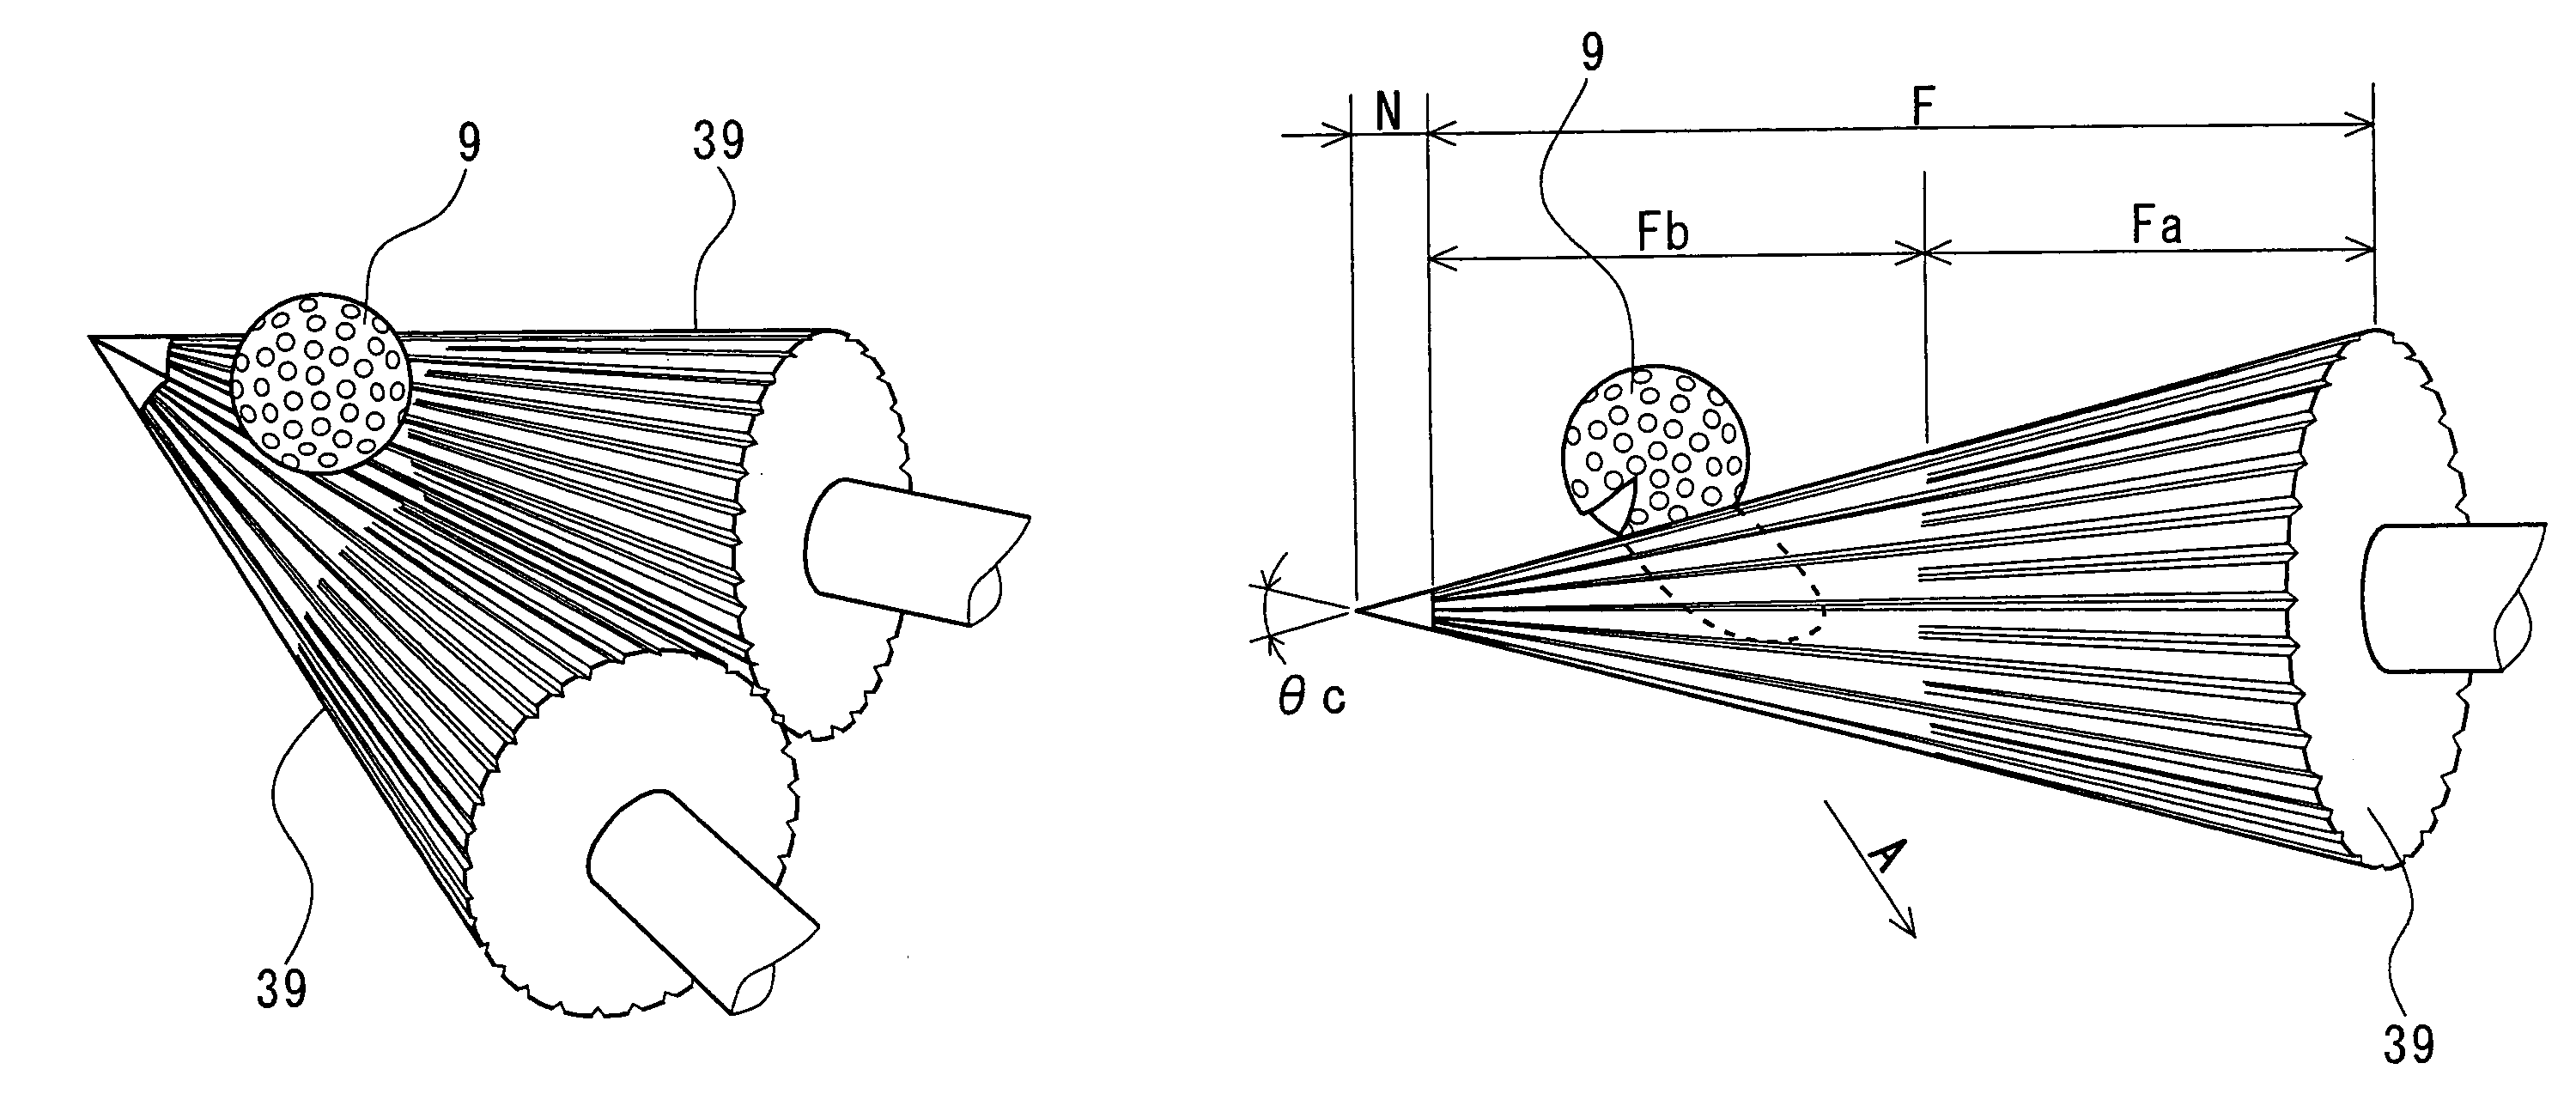 Apparatus for removing cover of golf ball from core